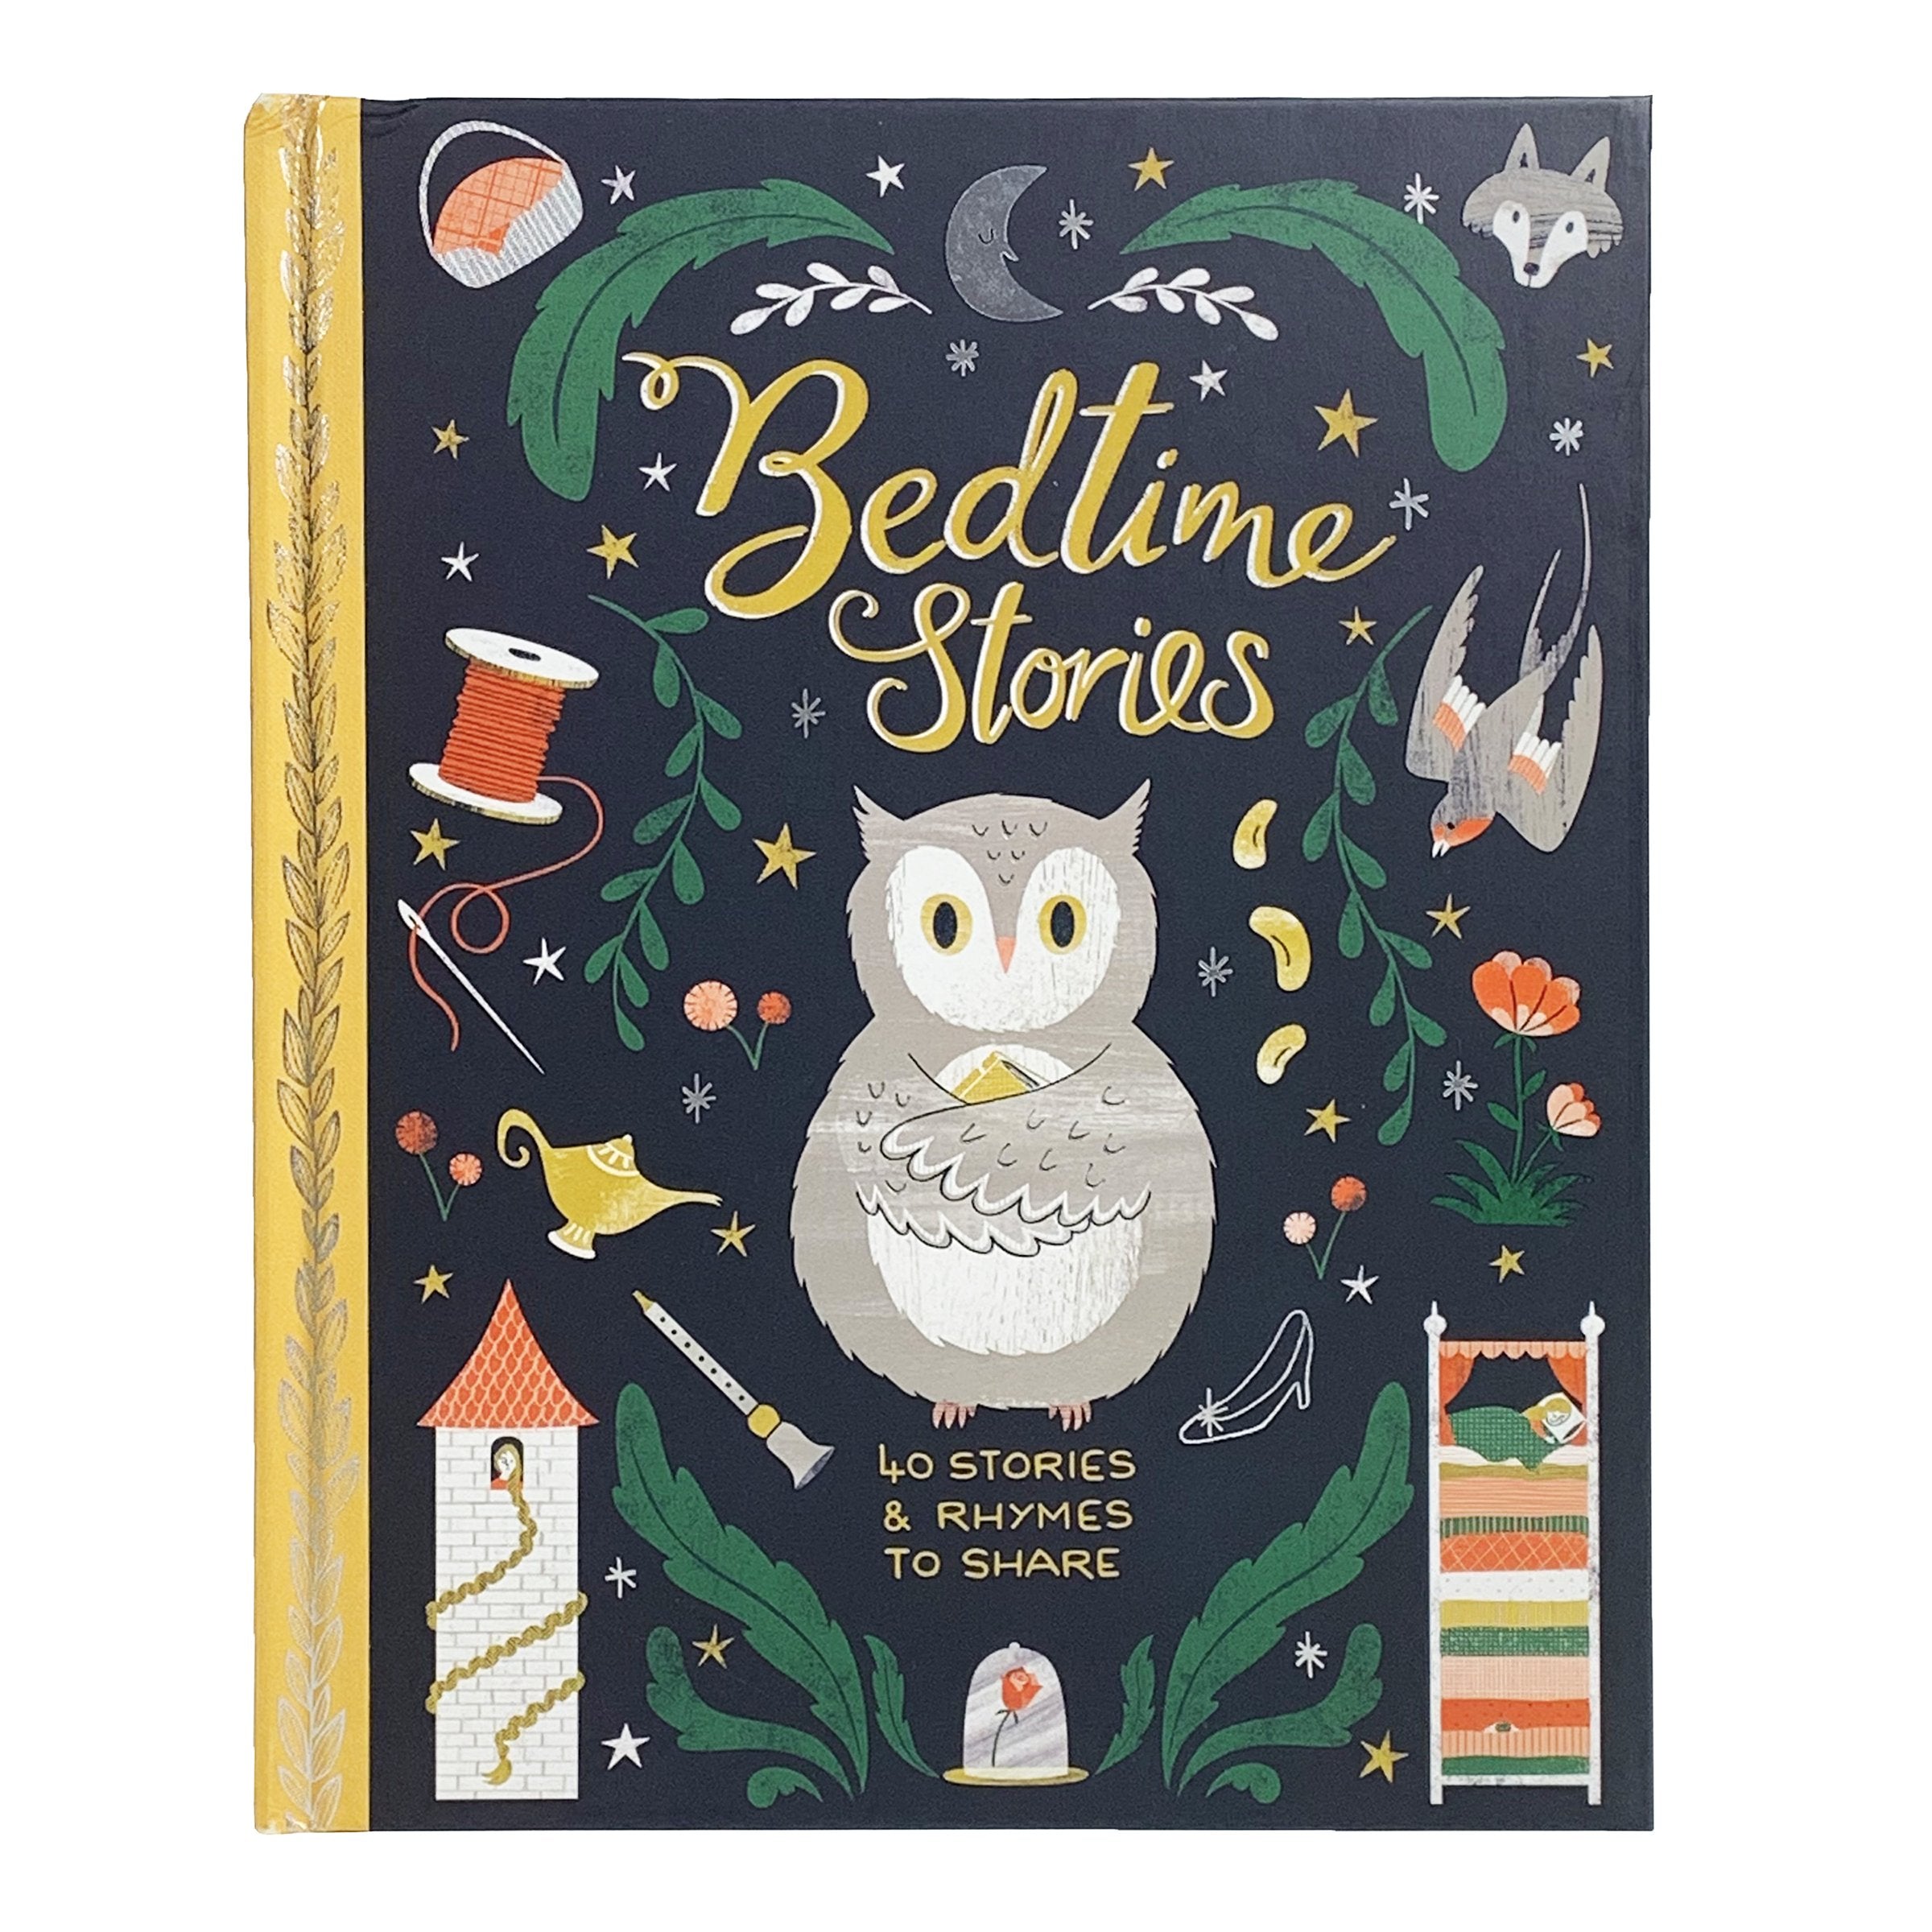 Bedtime Stories - 40 Stories and Rhymes to Share    